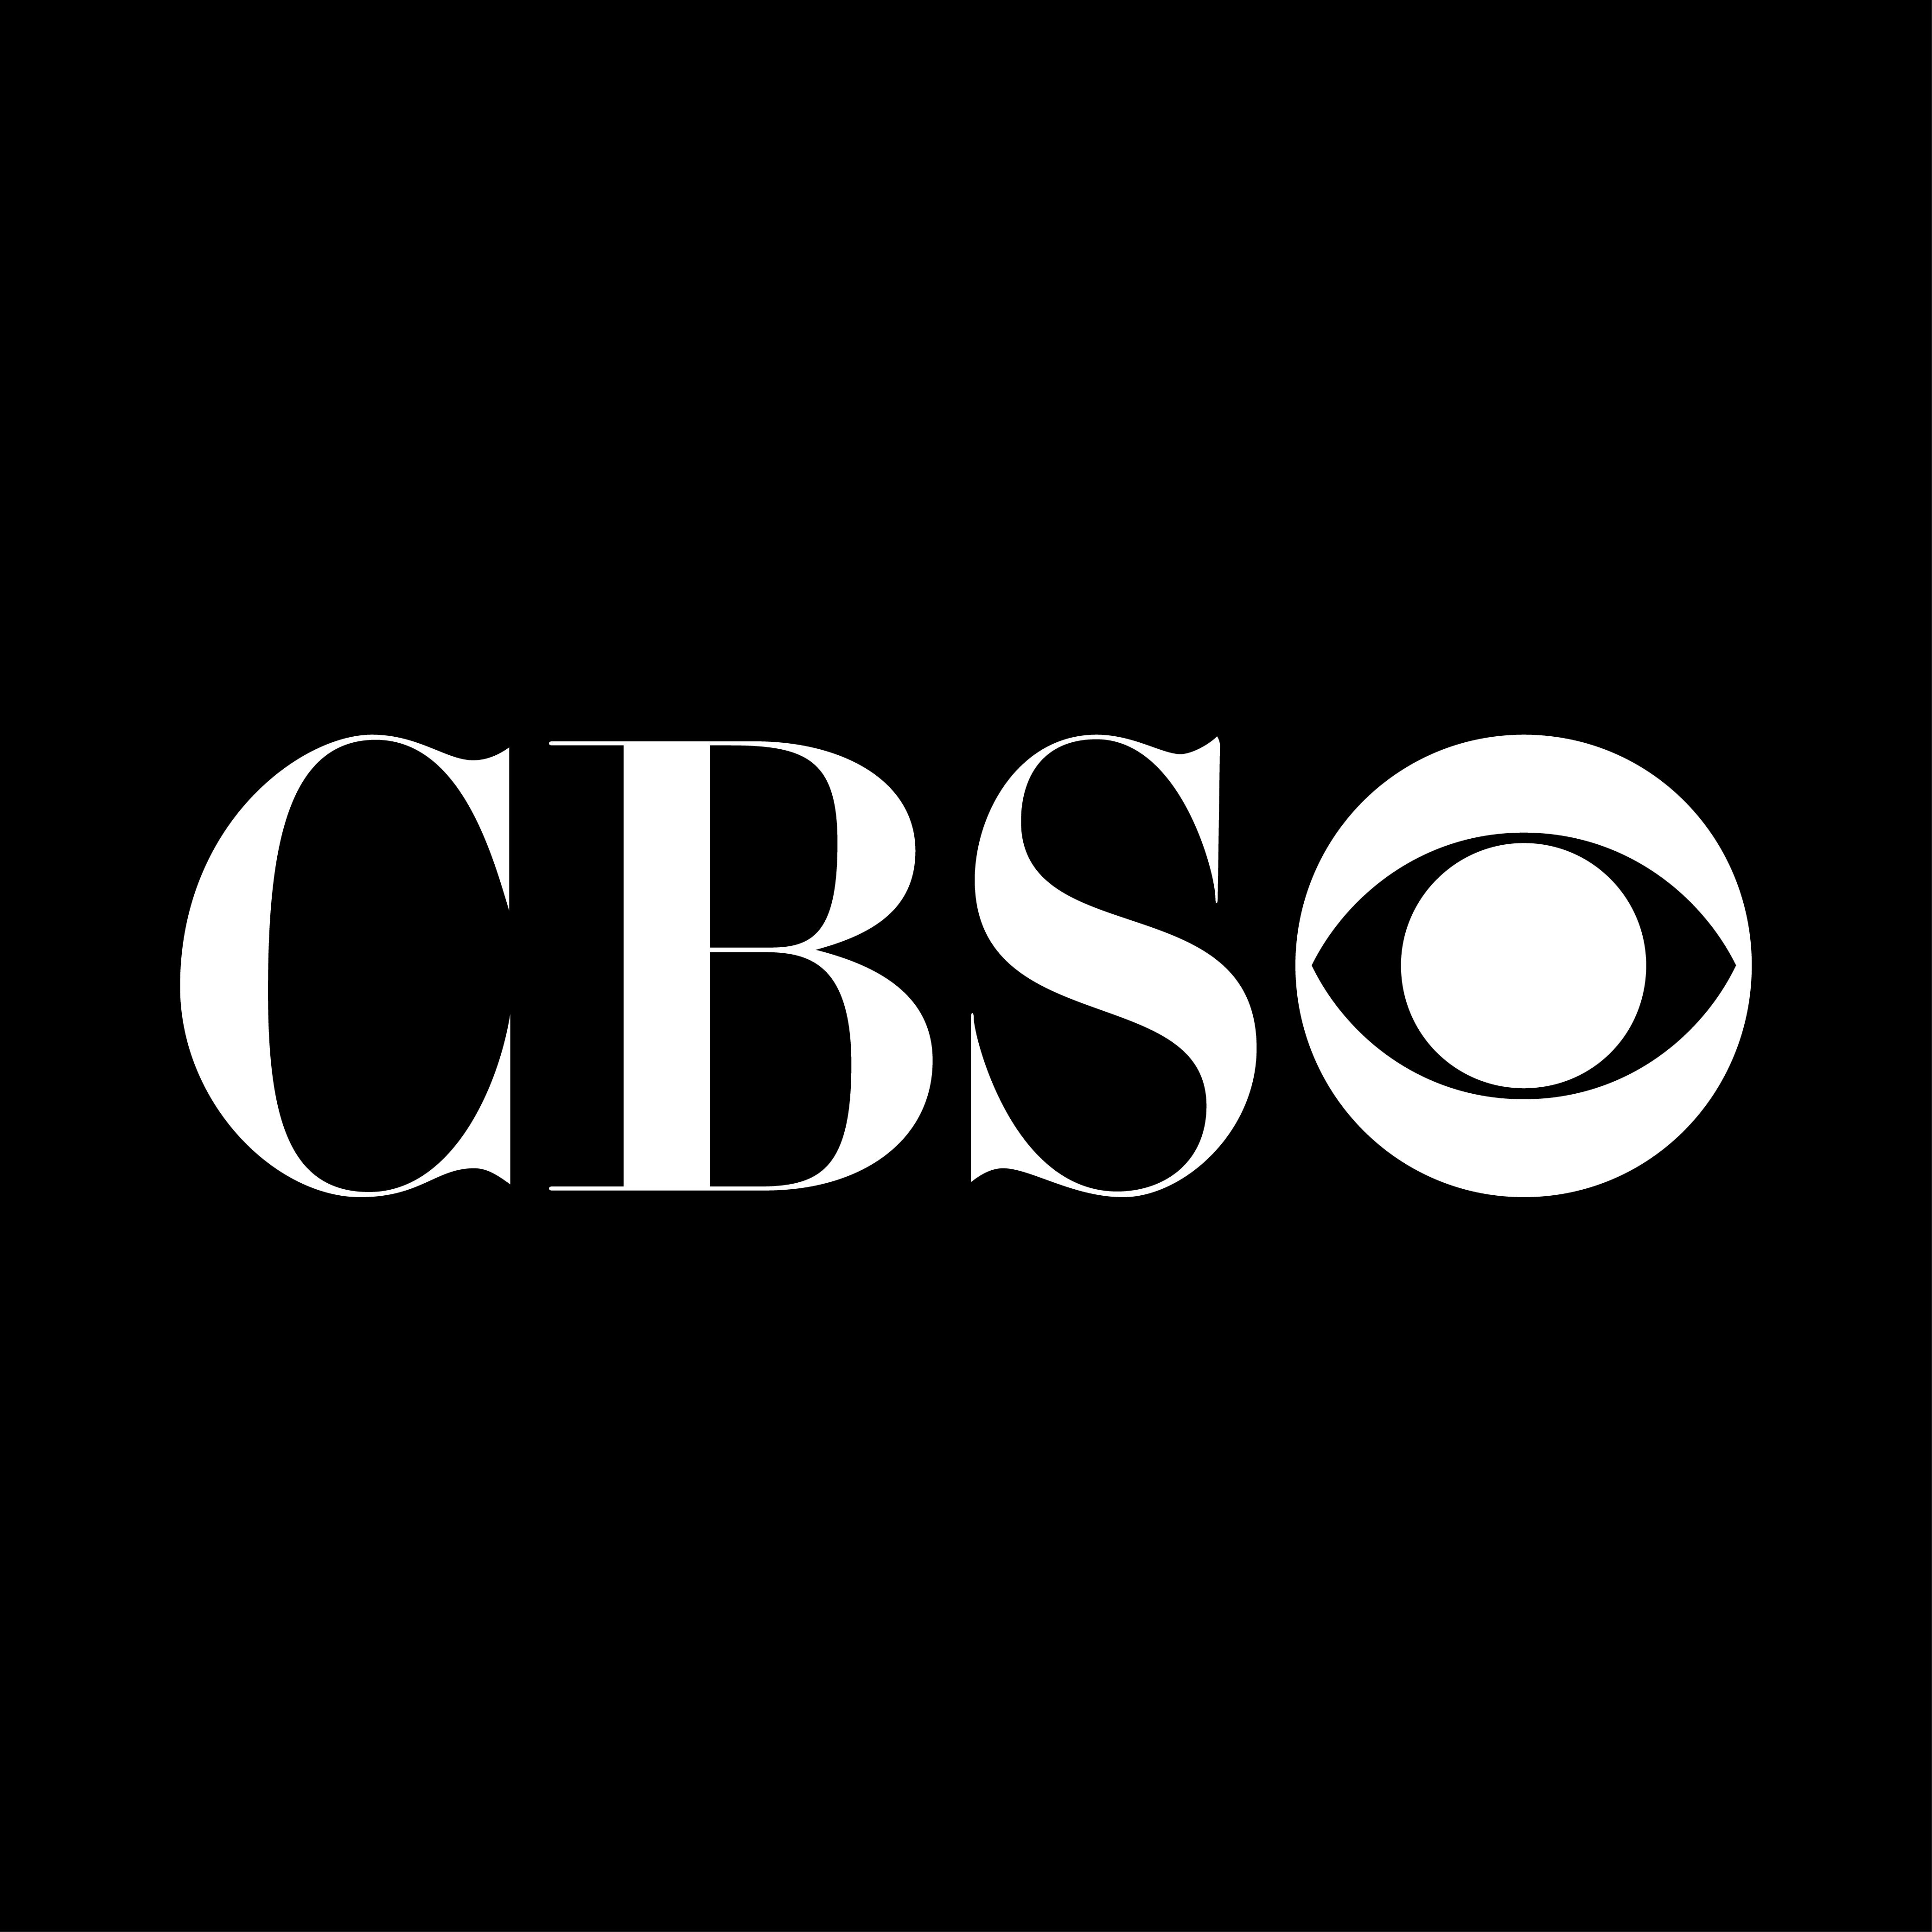 CBS To Set Record Winning Streak For The Most-Watched Broadcast Network For The 16th Consecutive TV Season